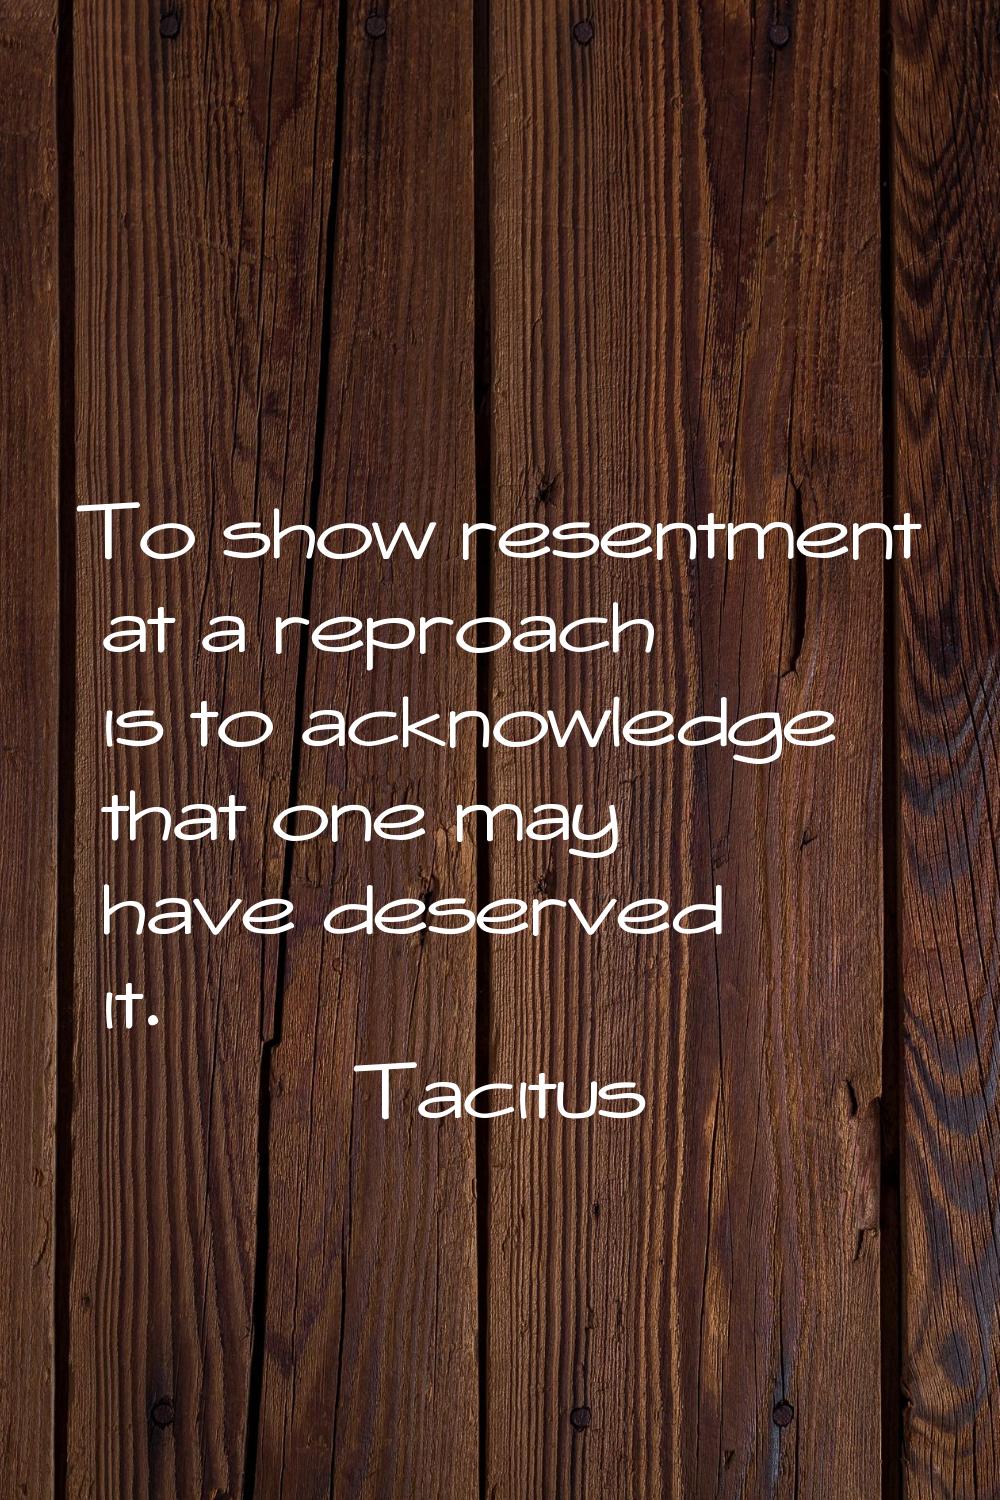 To show resentment at a reproach is to acknowledge that one may have deserved it.